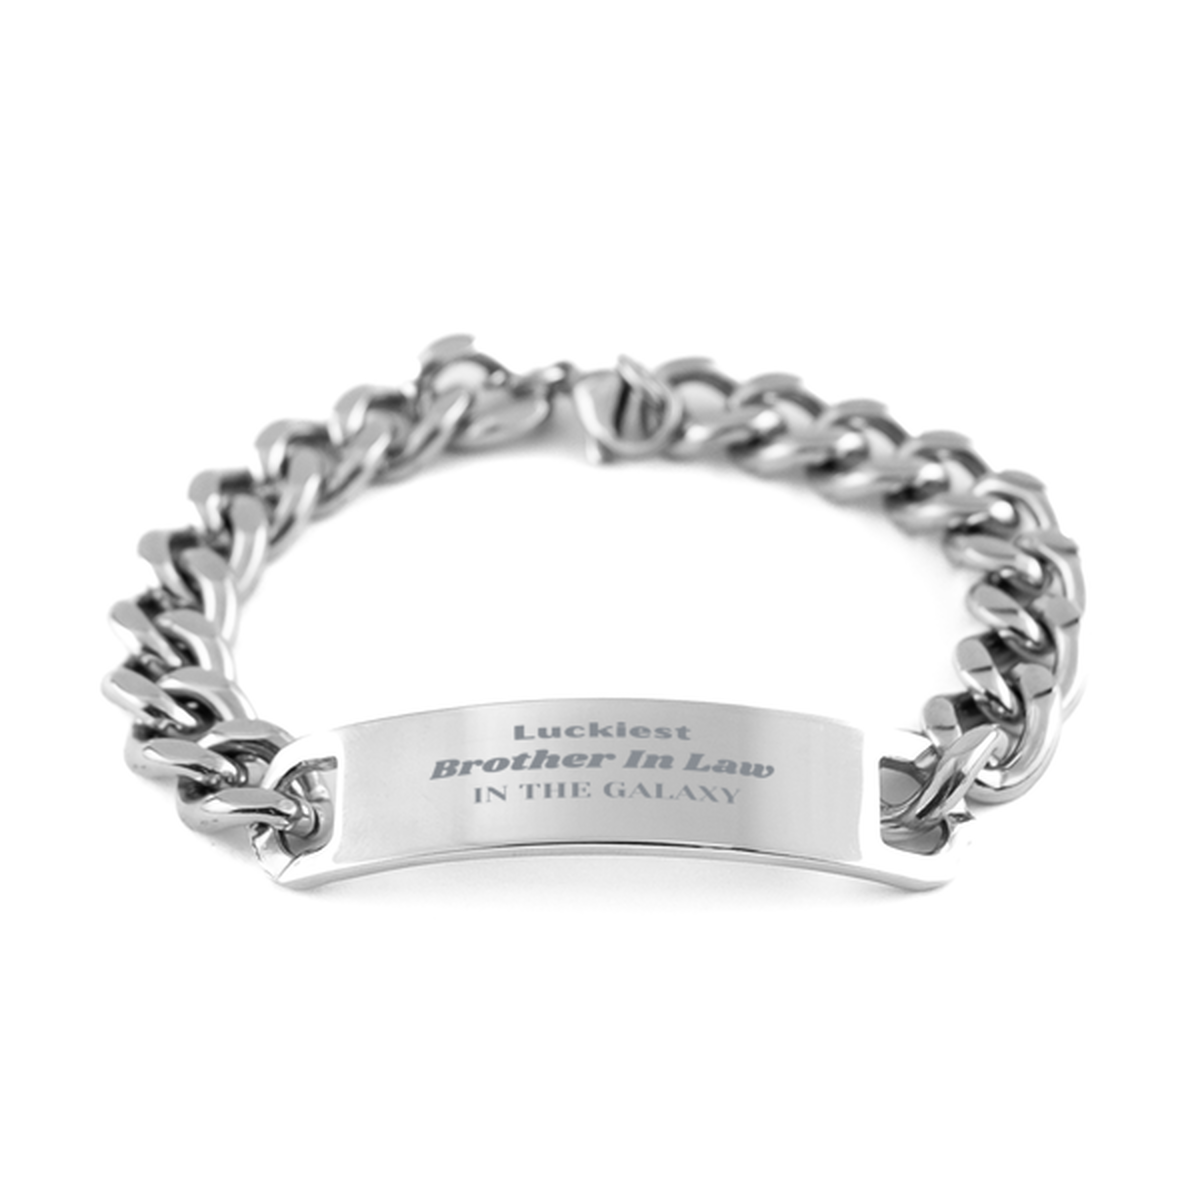 Luckiest Brother In Law in the Galaxy, To My Brother In Law Engraved Gifts, Christmas Brother In Law Cuban Chain Stainless Steel Bracelet Gifts, X-mas Birthday Unique Gifts For Brother In Law Men Women